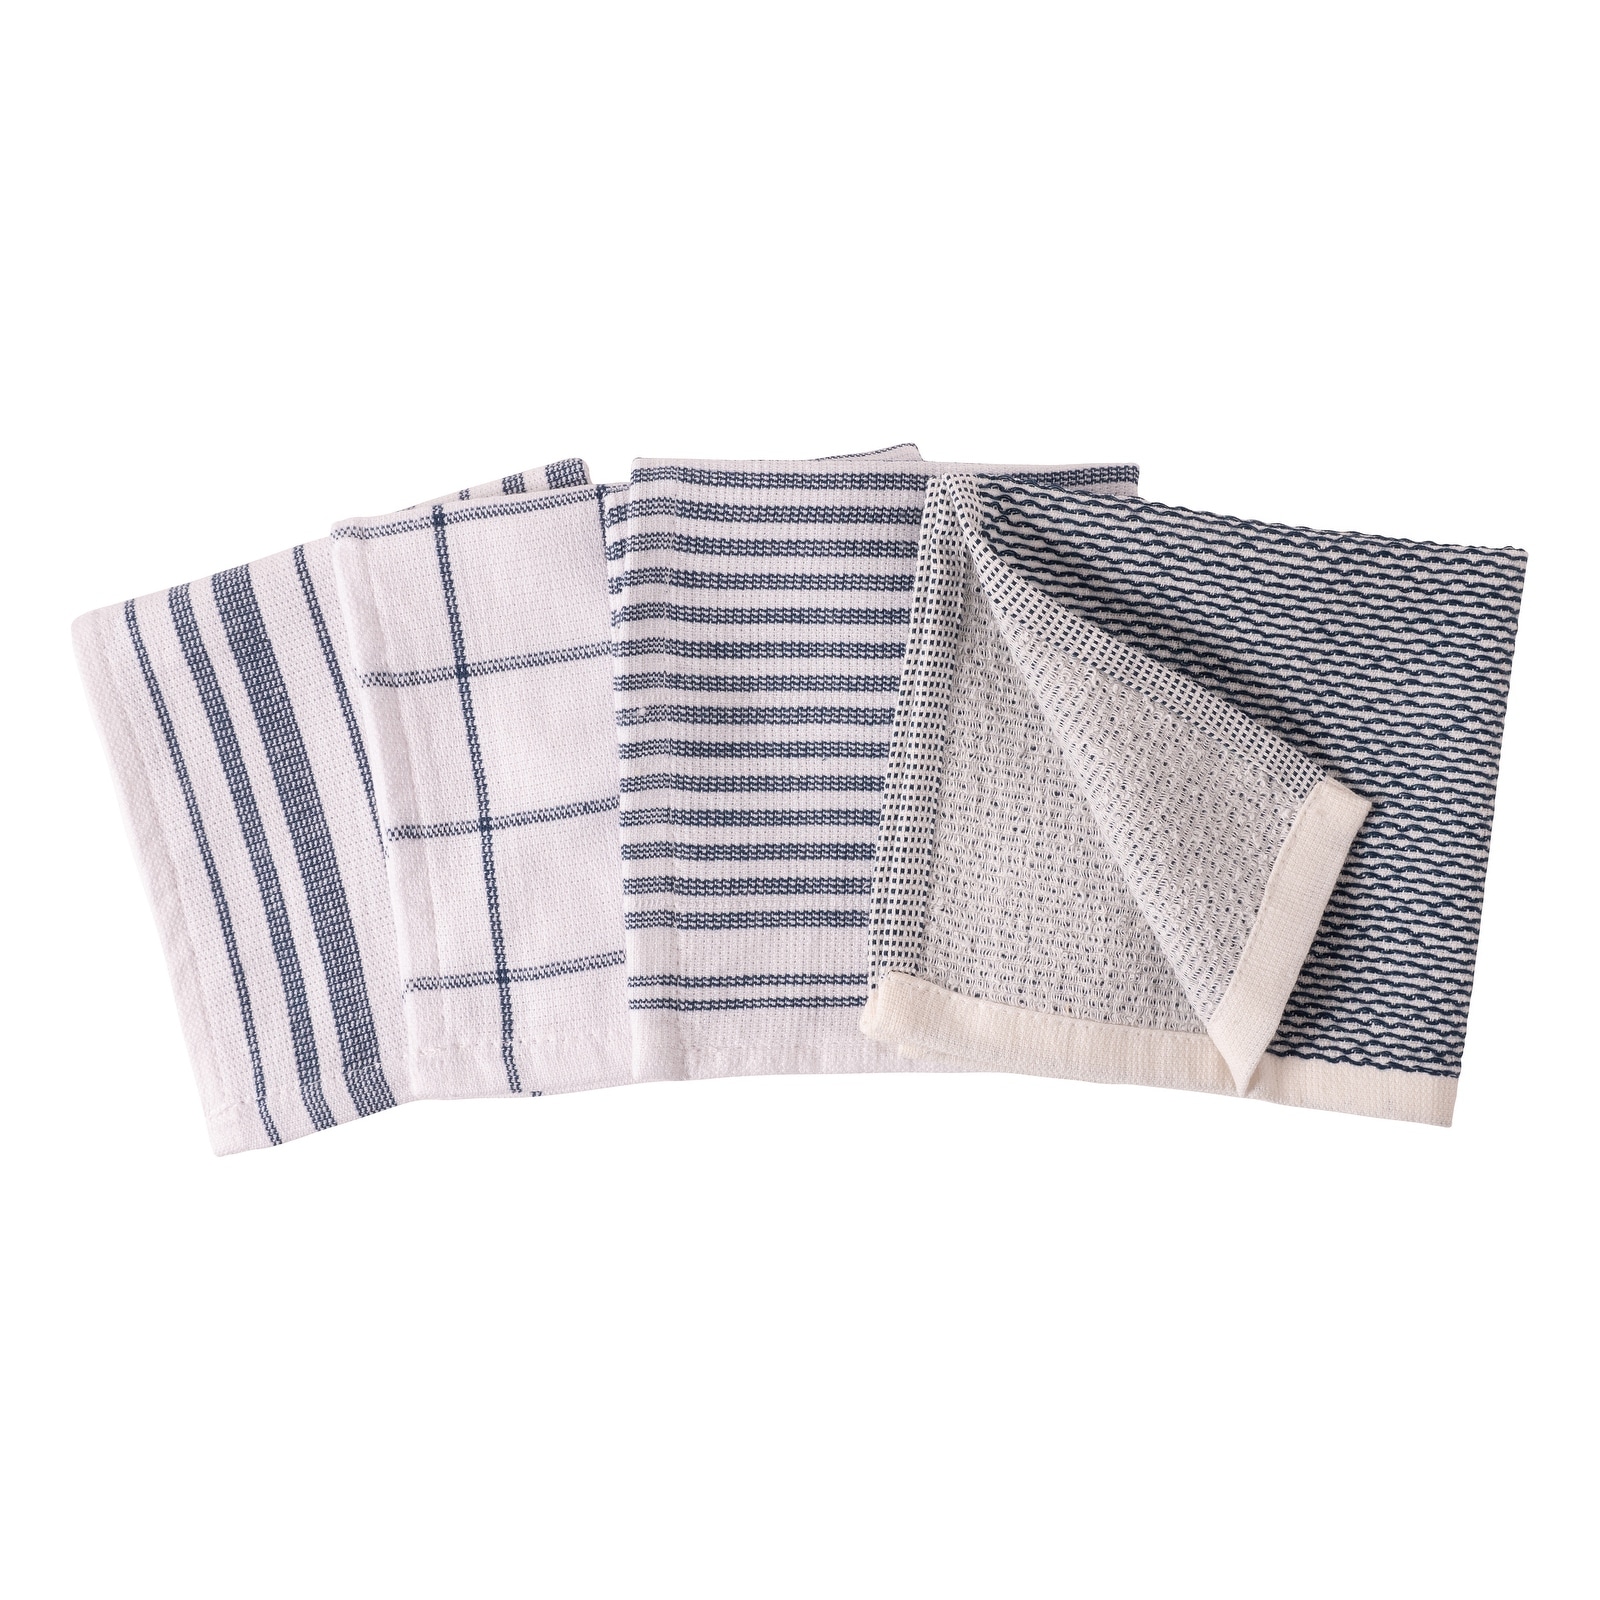 https://ak1.ostkcdn.com/images/products/is/images/direct/a3ac2bfc74903599d076bd7cb7fe9fc6d095da16/Bed-Bath-and-Beyond-Our-Table-Dual-Purpose-Dish-Cloths---Set-of-4.jpg